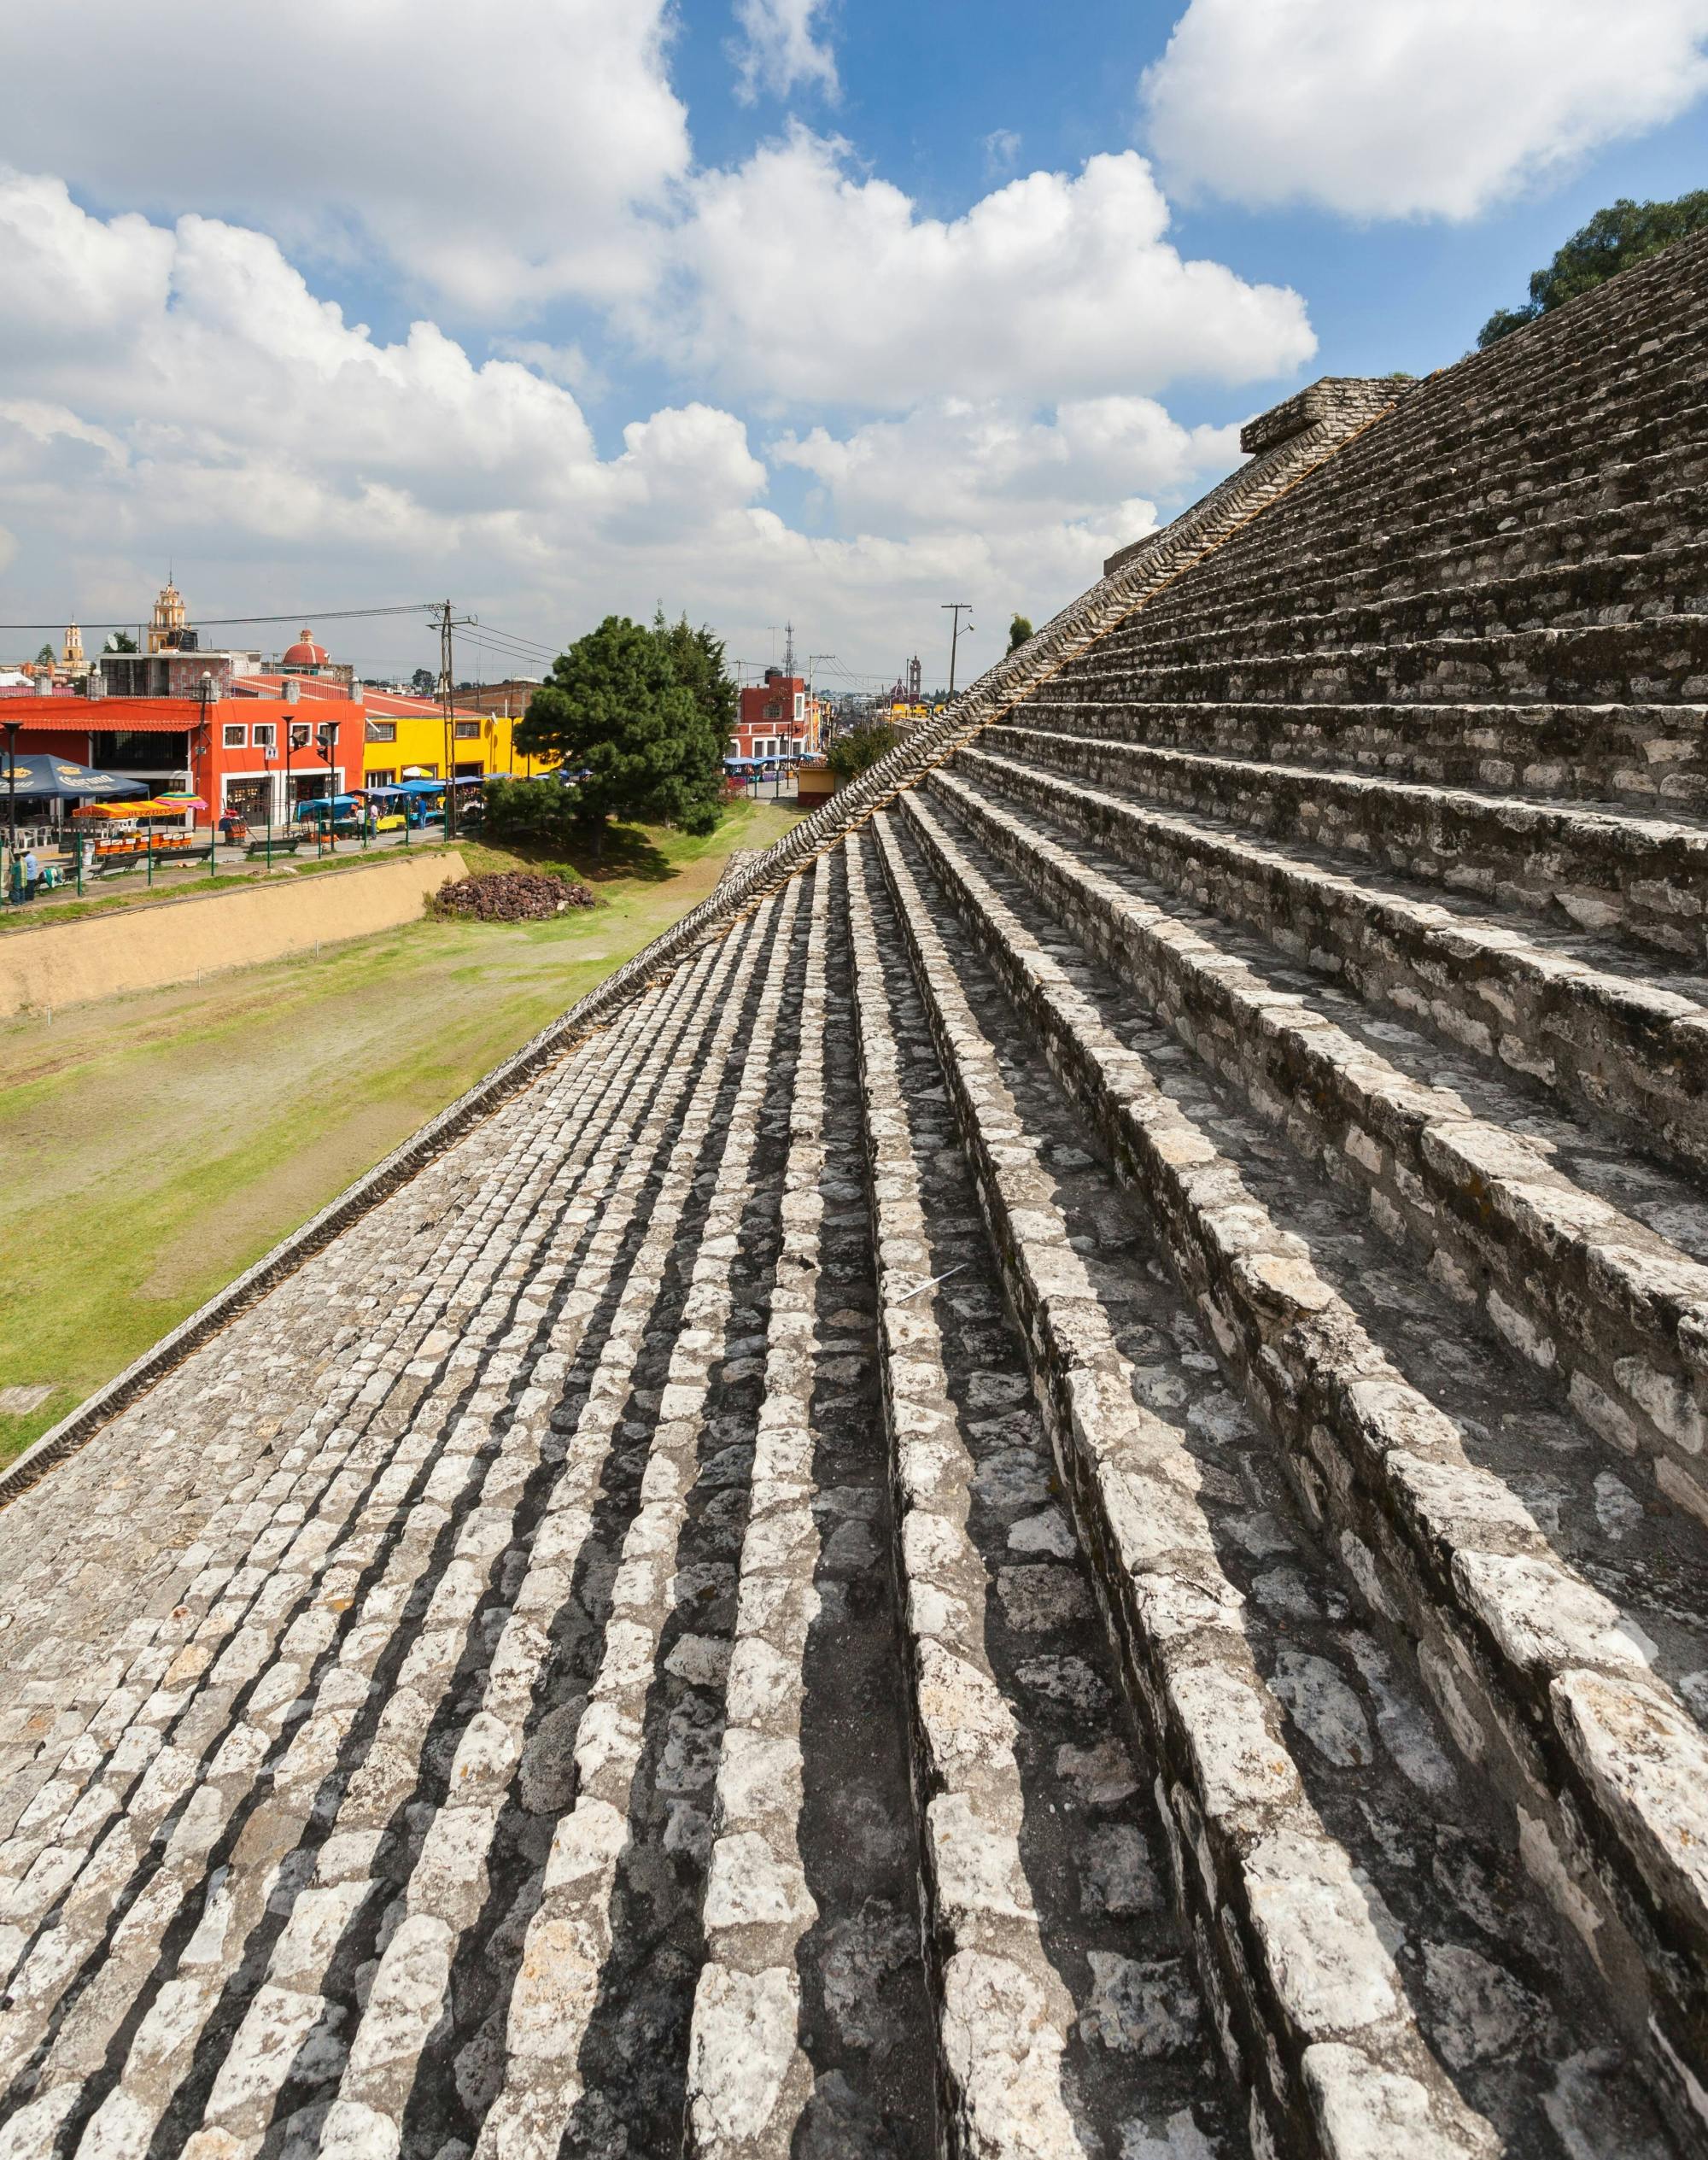 Discover The Magical Towns of Puebla & Cholula